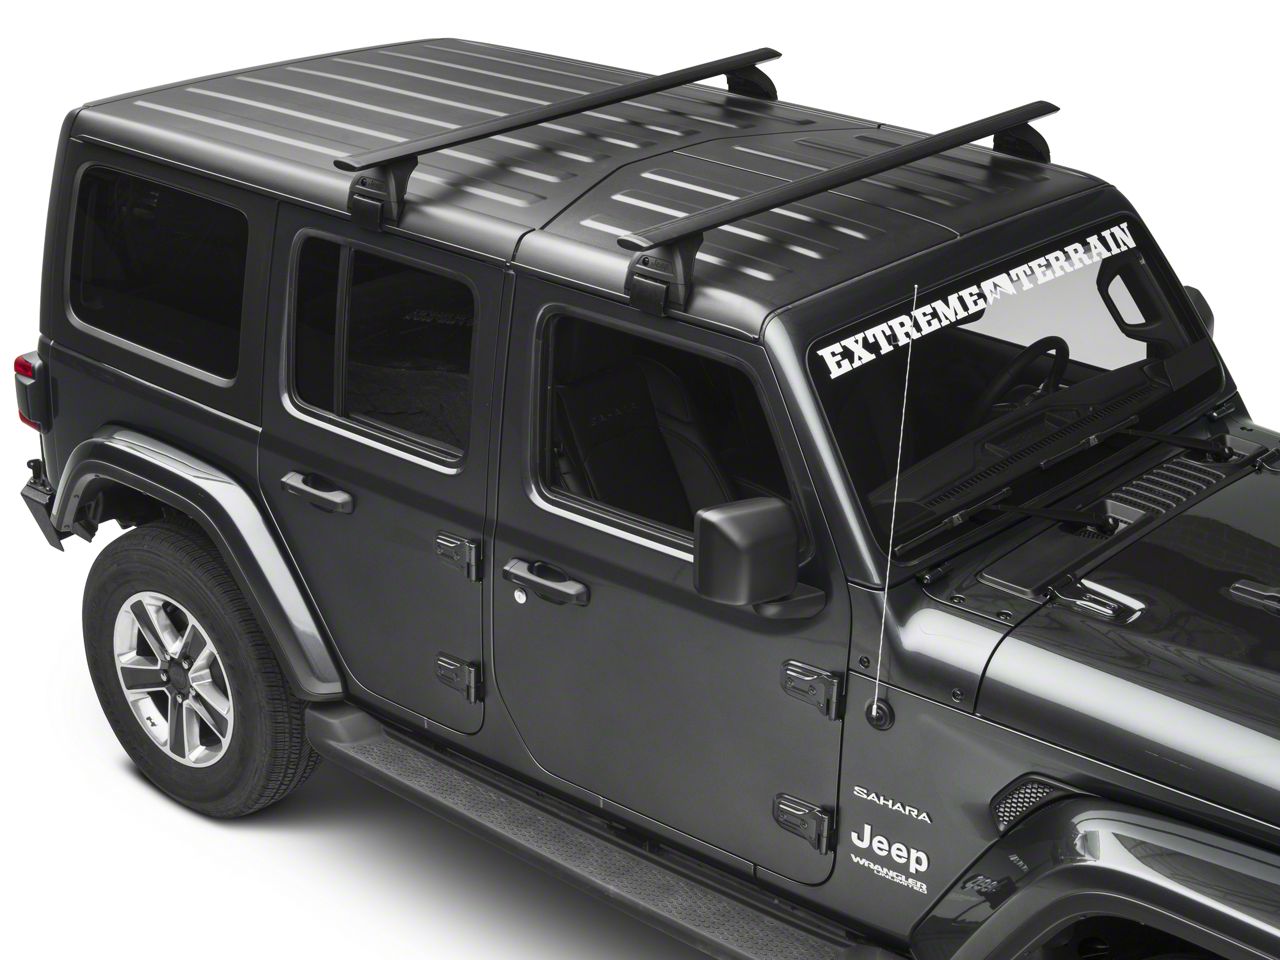 2018 Jeep Wrangler JL - Hard Top Support, Roof Rack and Cargo Box - Rhino  Rack / Thule